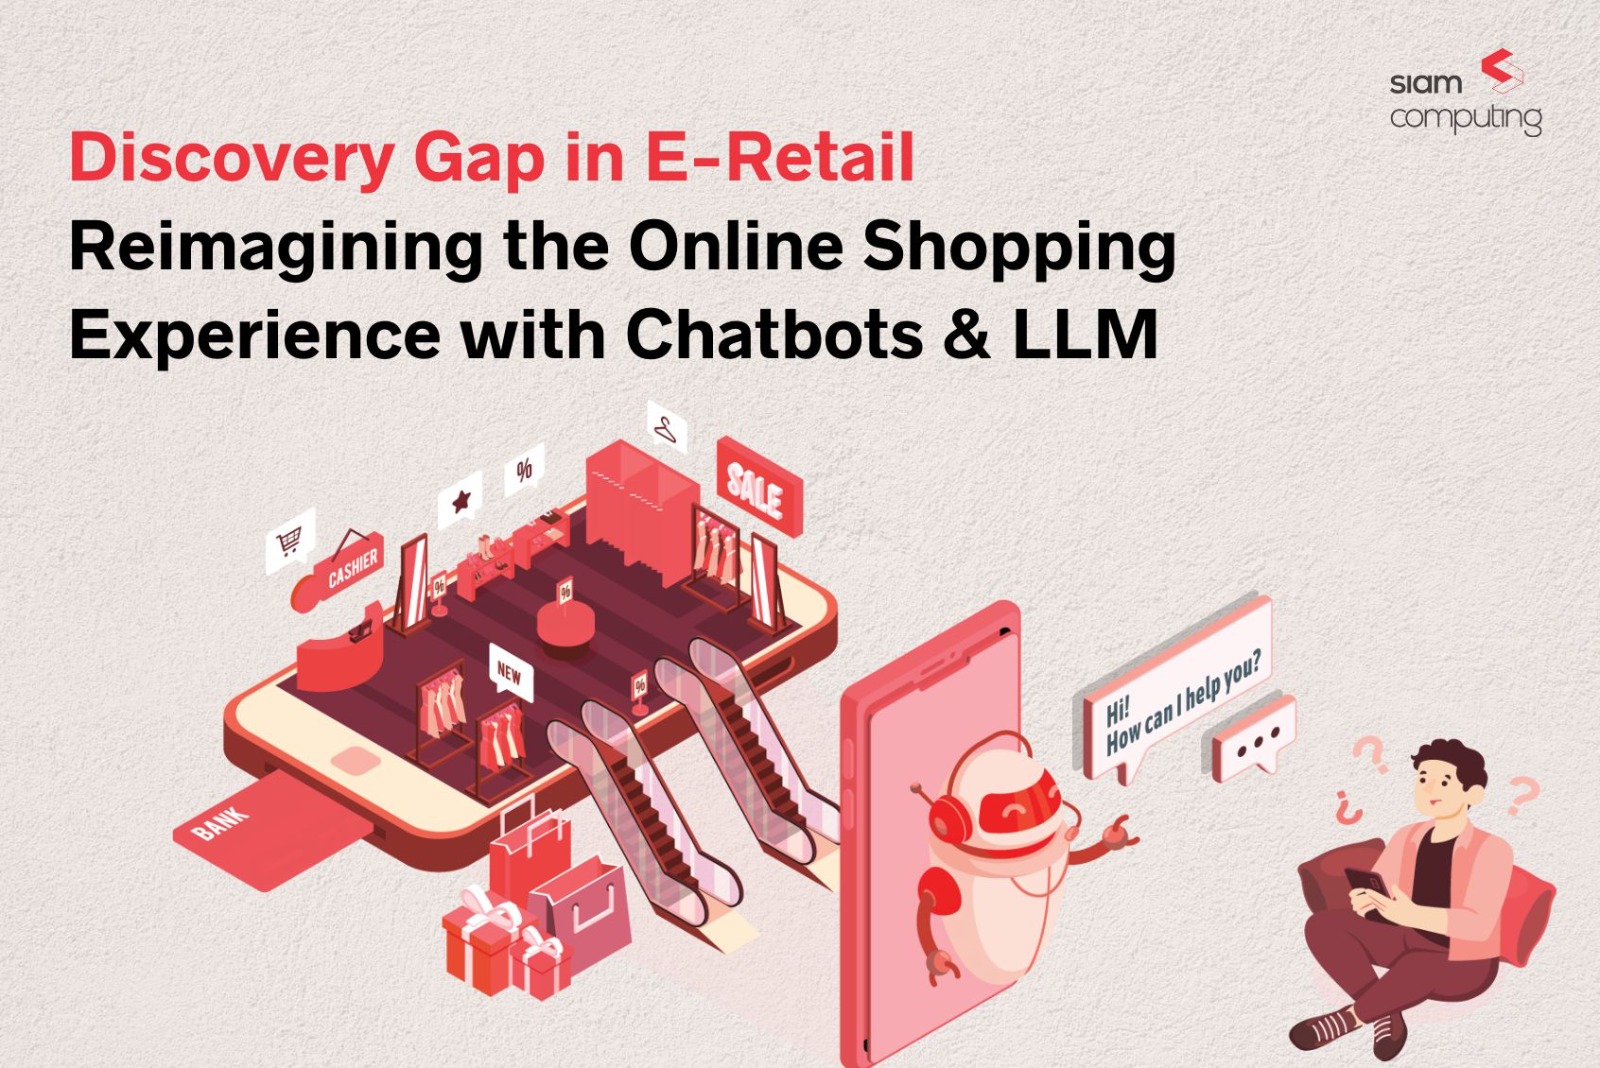 Discovery Gap in E-Retail: Reimagining the Online Shopping Experience with Chatbots & LLM